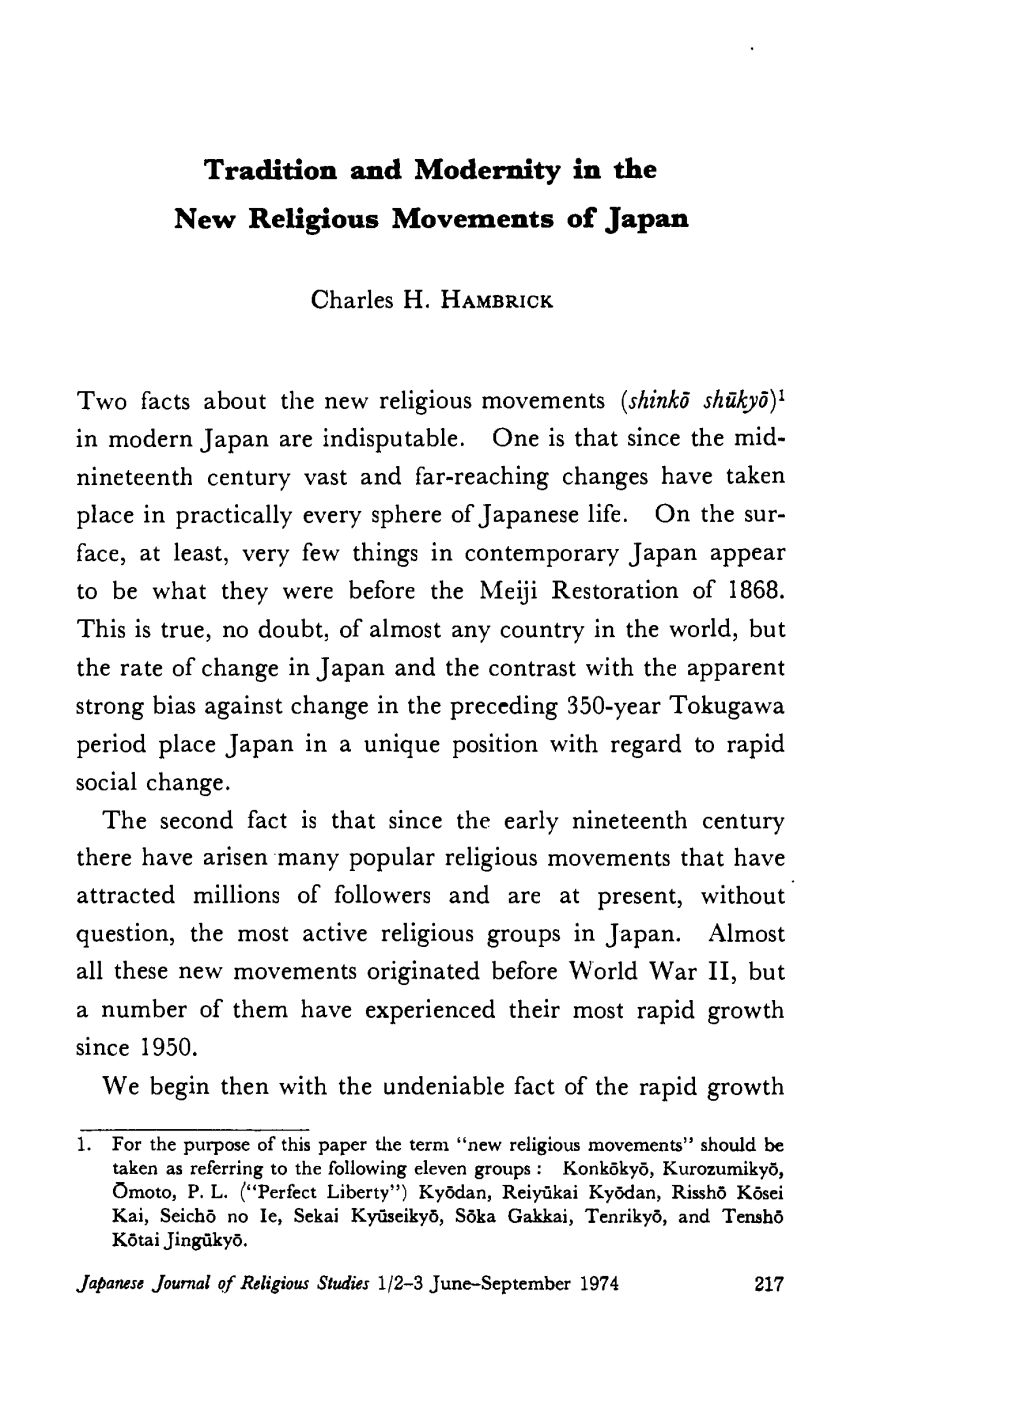 Tradition and Modernity in the New Religious Movements of Japan